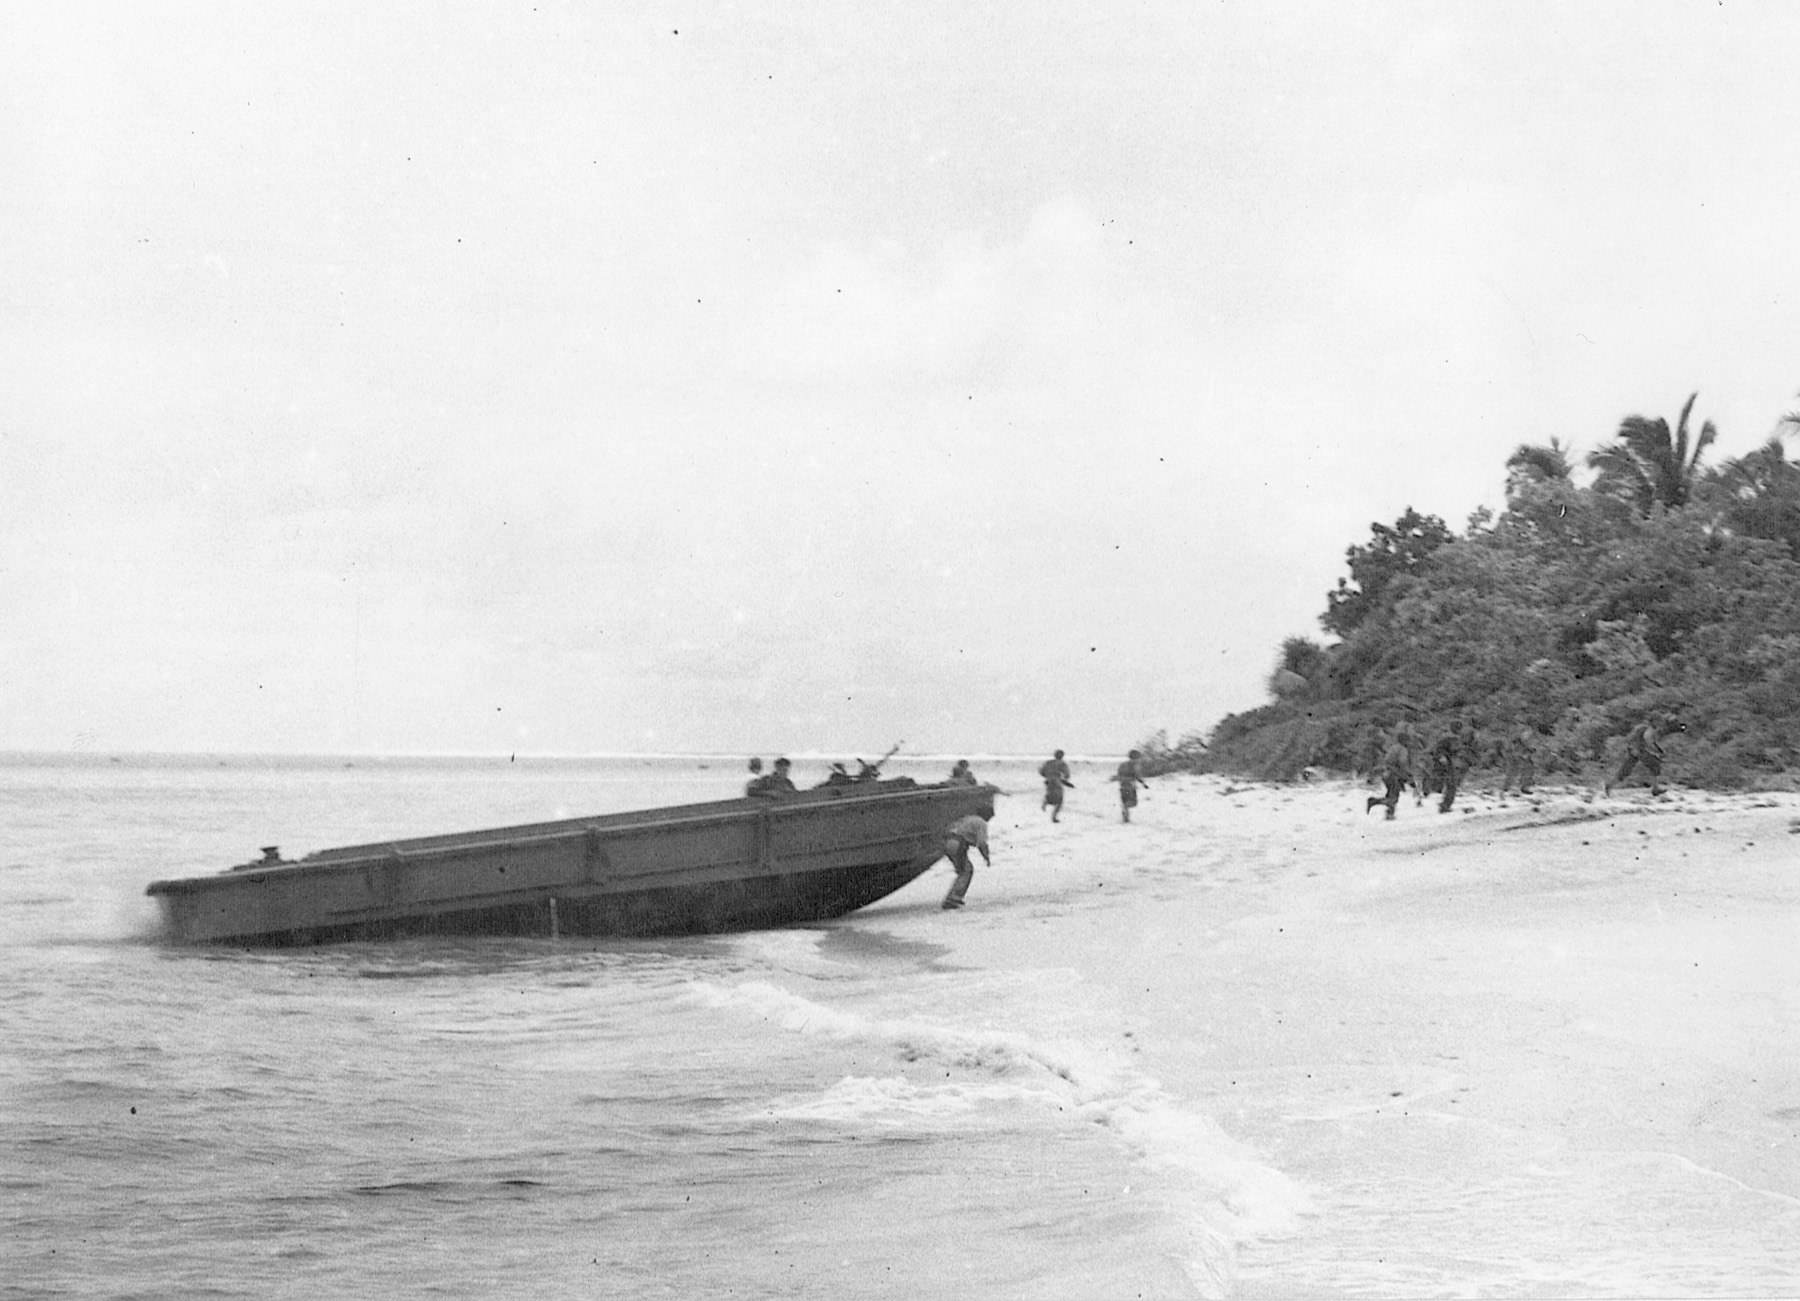 Moving quickly from their landing craft and into the relative safety of the jungle, American troops head toward their objective on the strategically vital island of Guadalcanal.